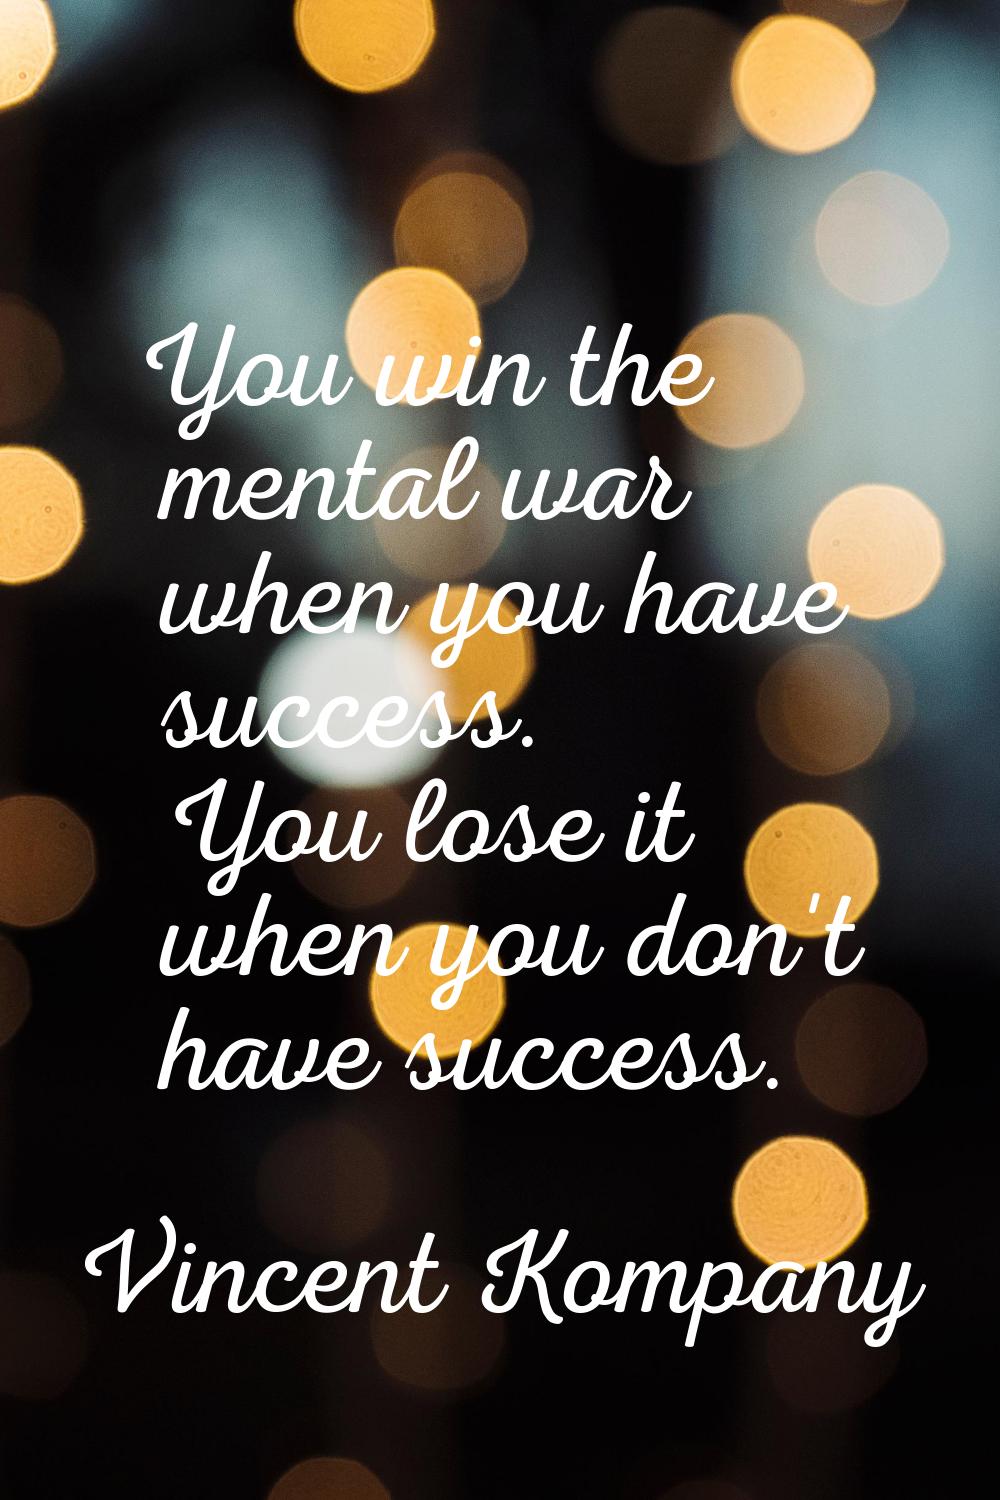 You win the mental war when you have success. You lose it when you don't have success.